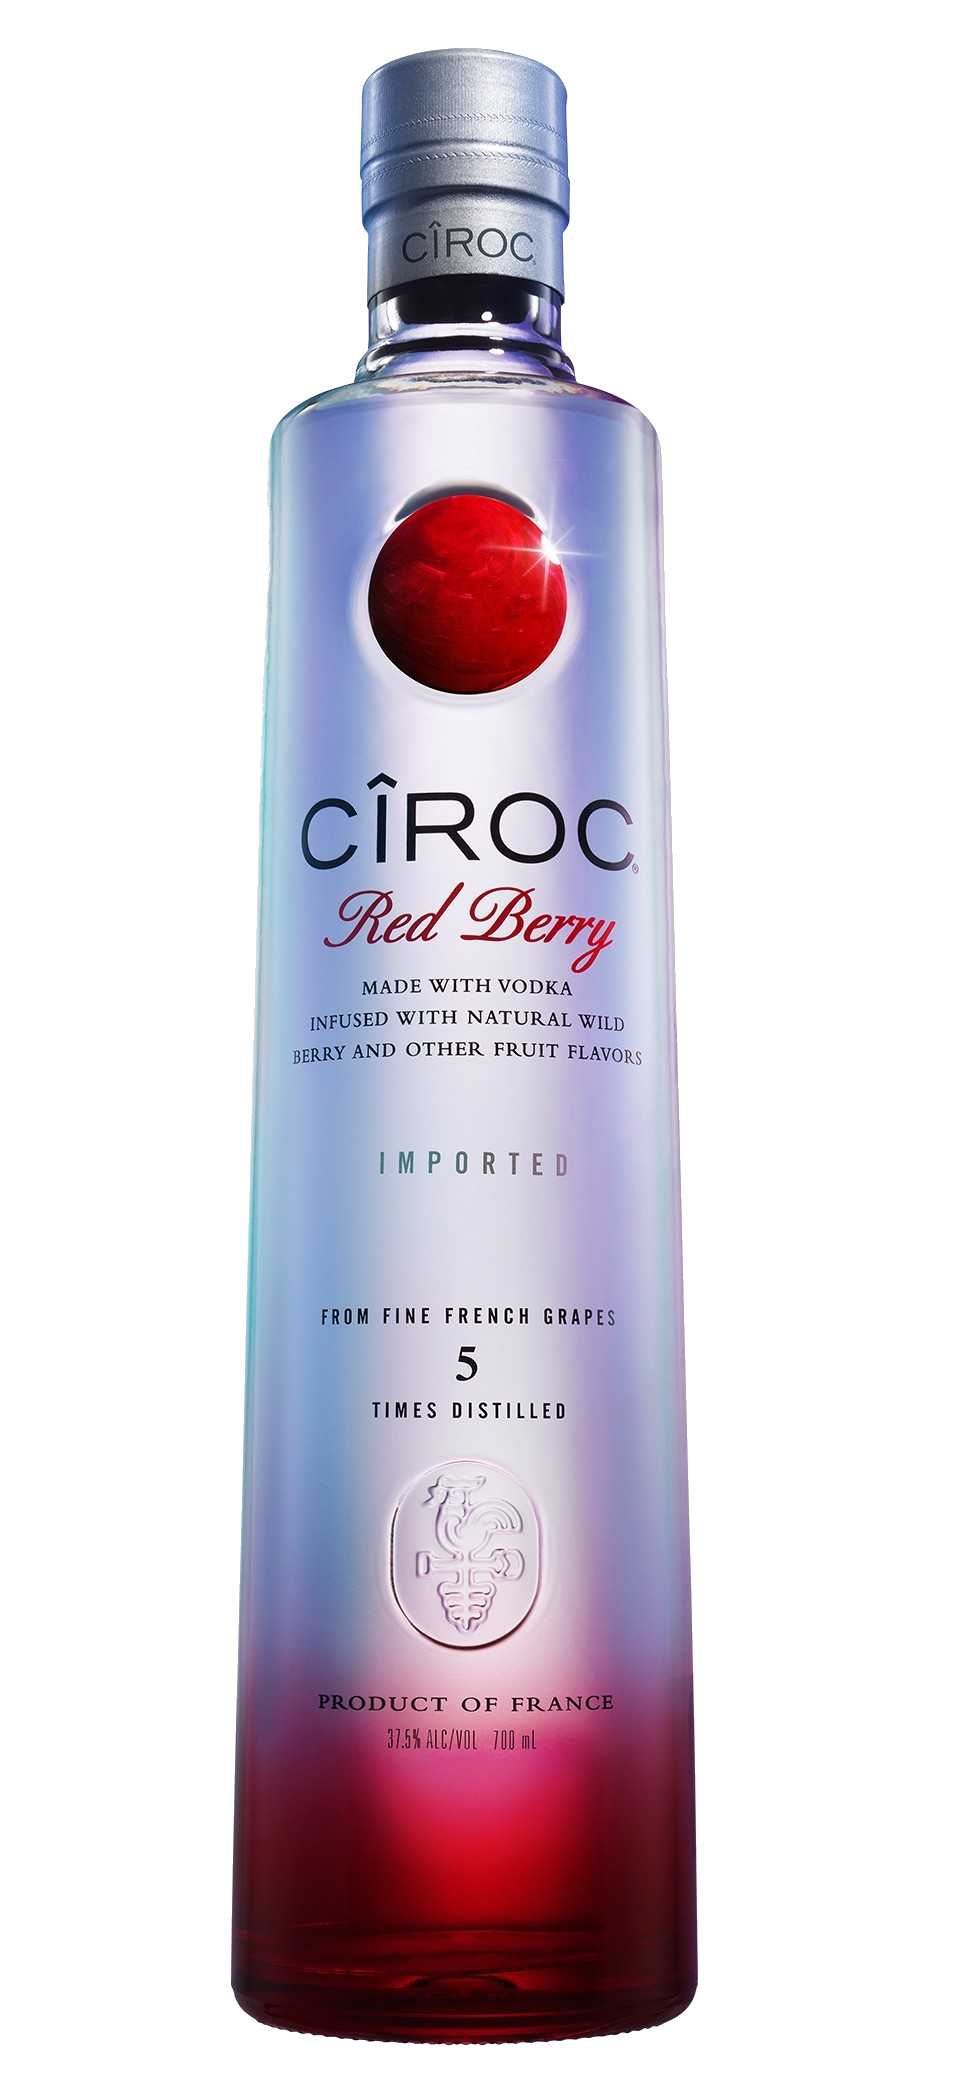 Red berry vodka the. Ciroc bottle png